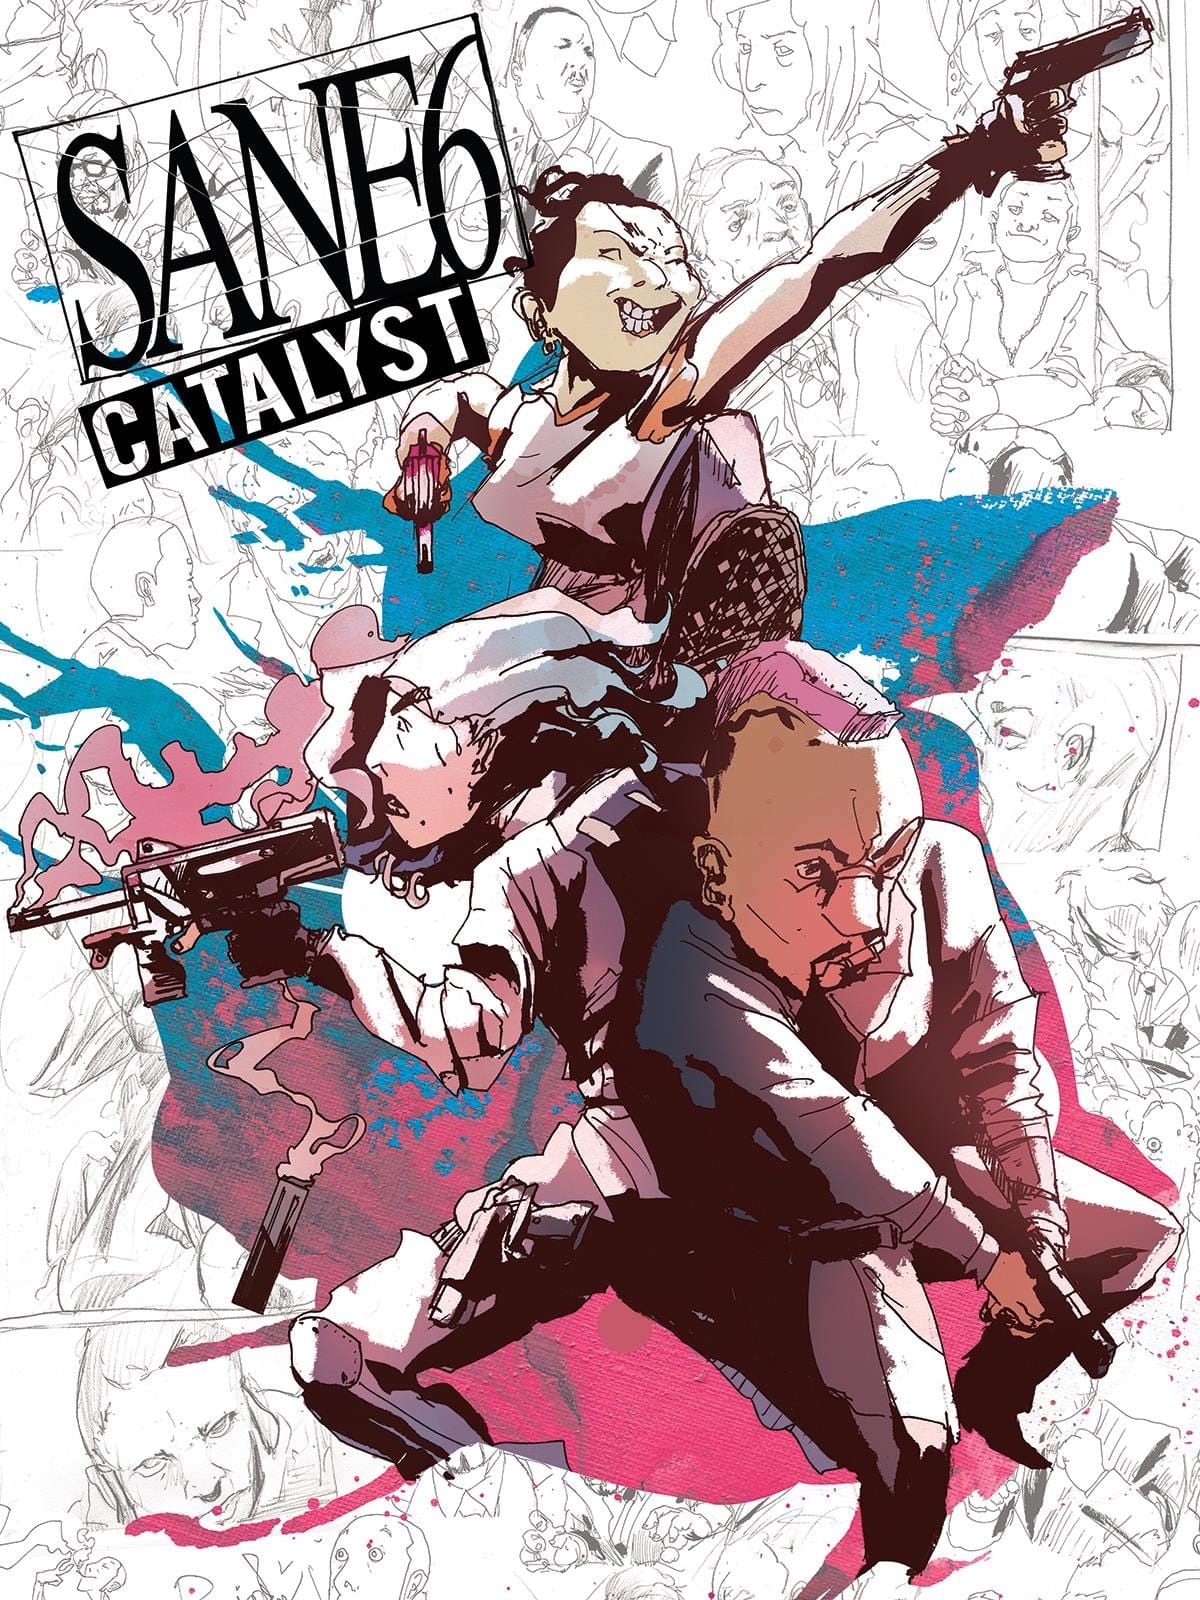 Sane6: Catalyst #1 Reprint 12 criminal contractors stumble into the biggest job of their careers, but there may be more to the client’s agenda than they thought.